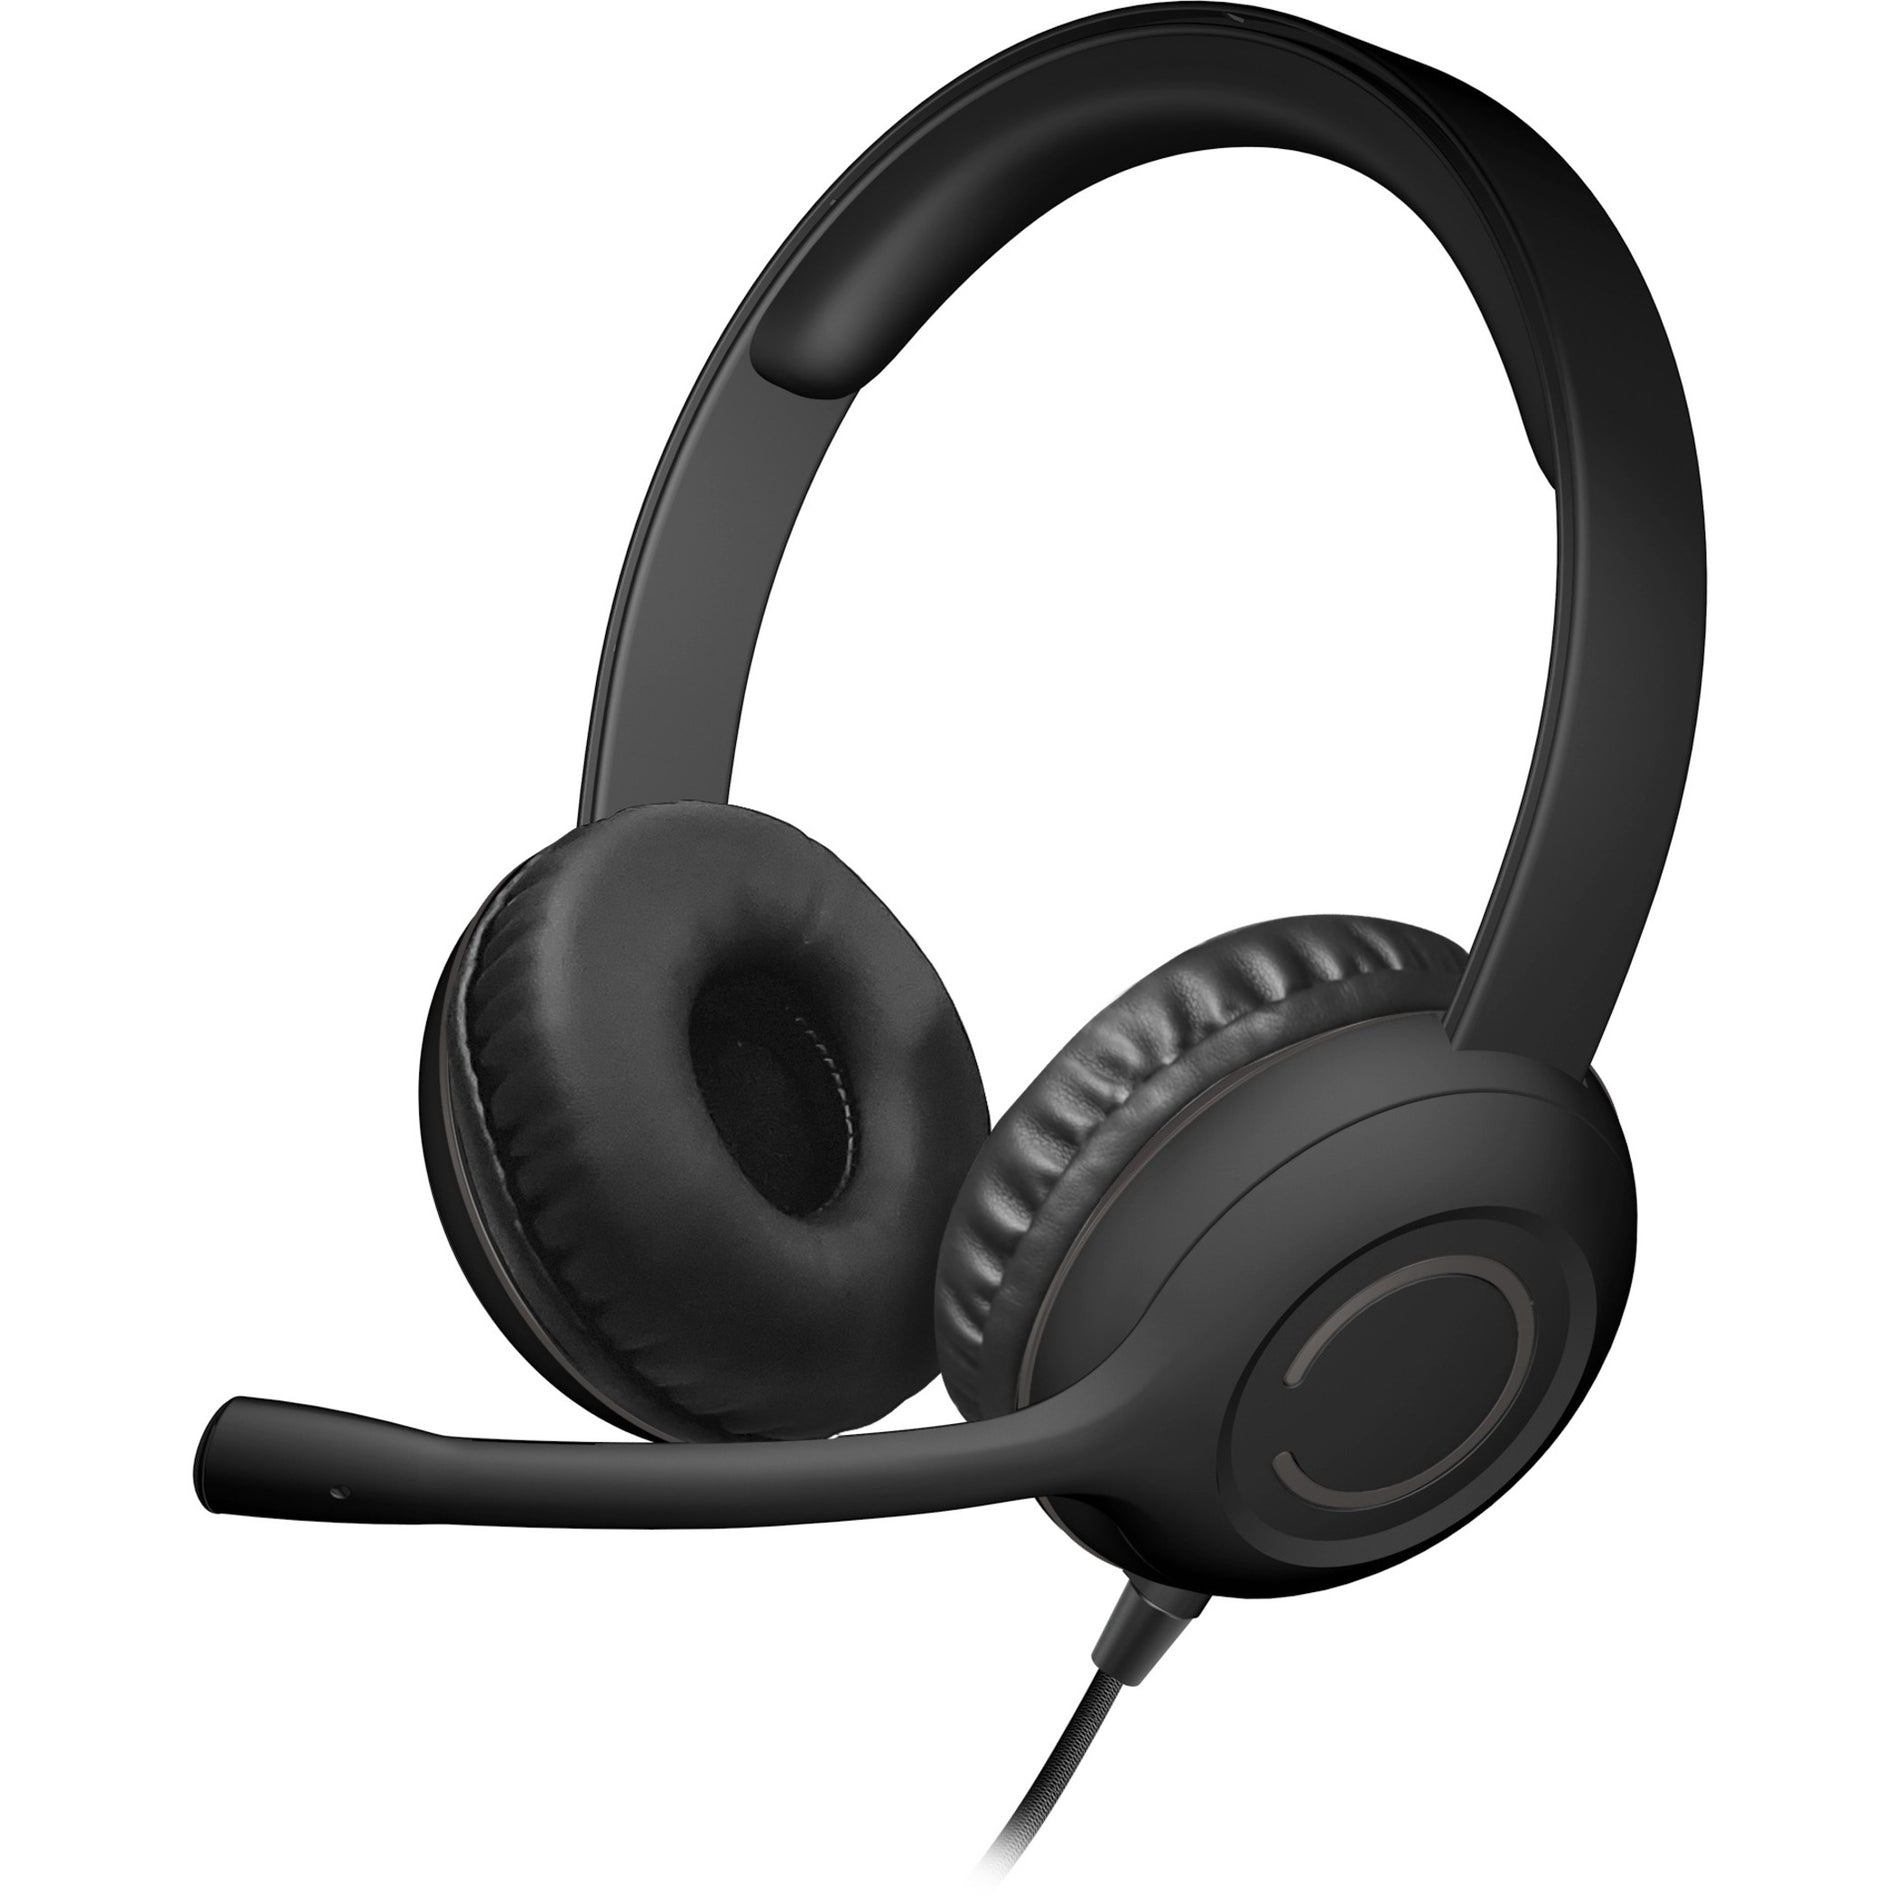 Cyber Acoustics AC-5812 Stereo Headset with USB & 3.5mm, Tangle-free Cable, LED Indicator, Mute Button, Adjustable Headband